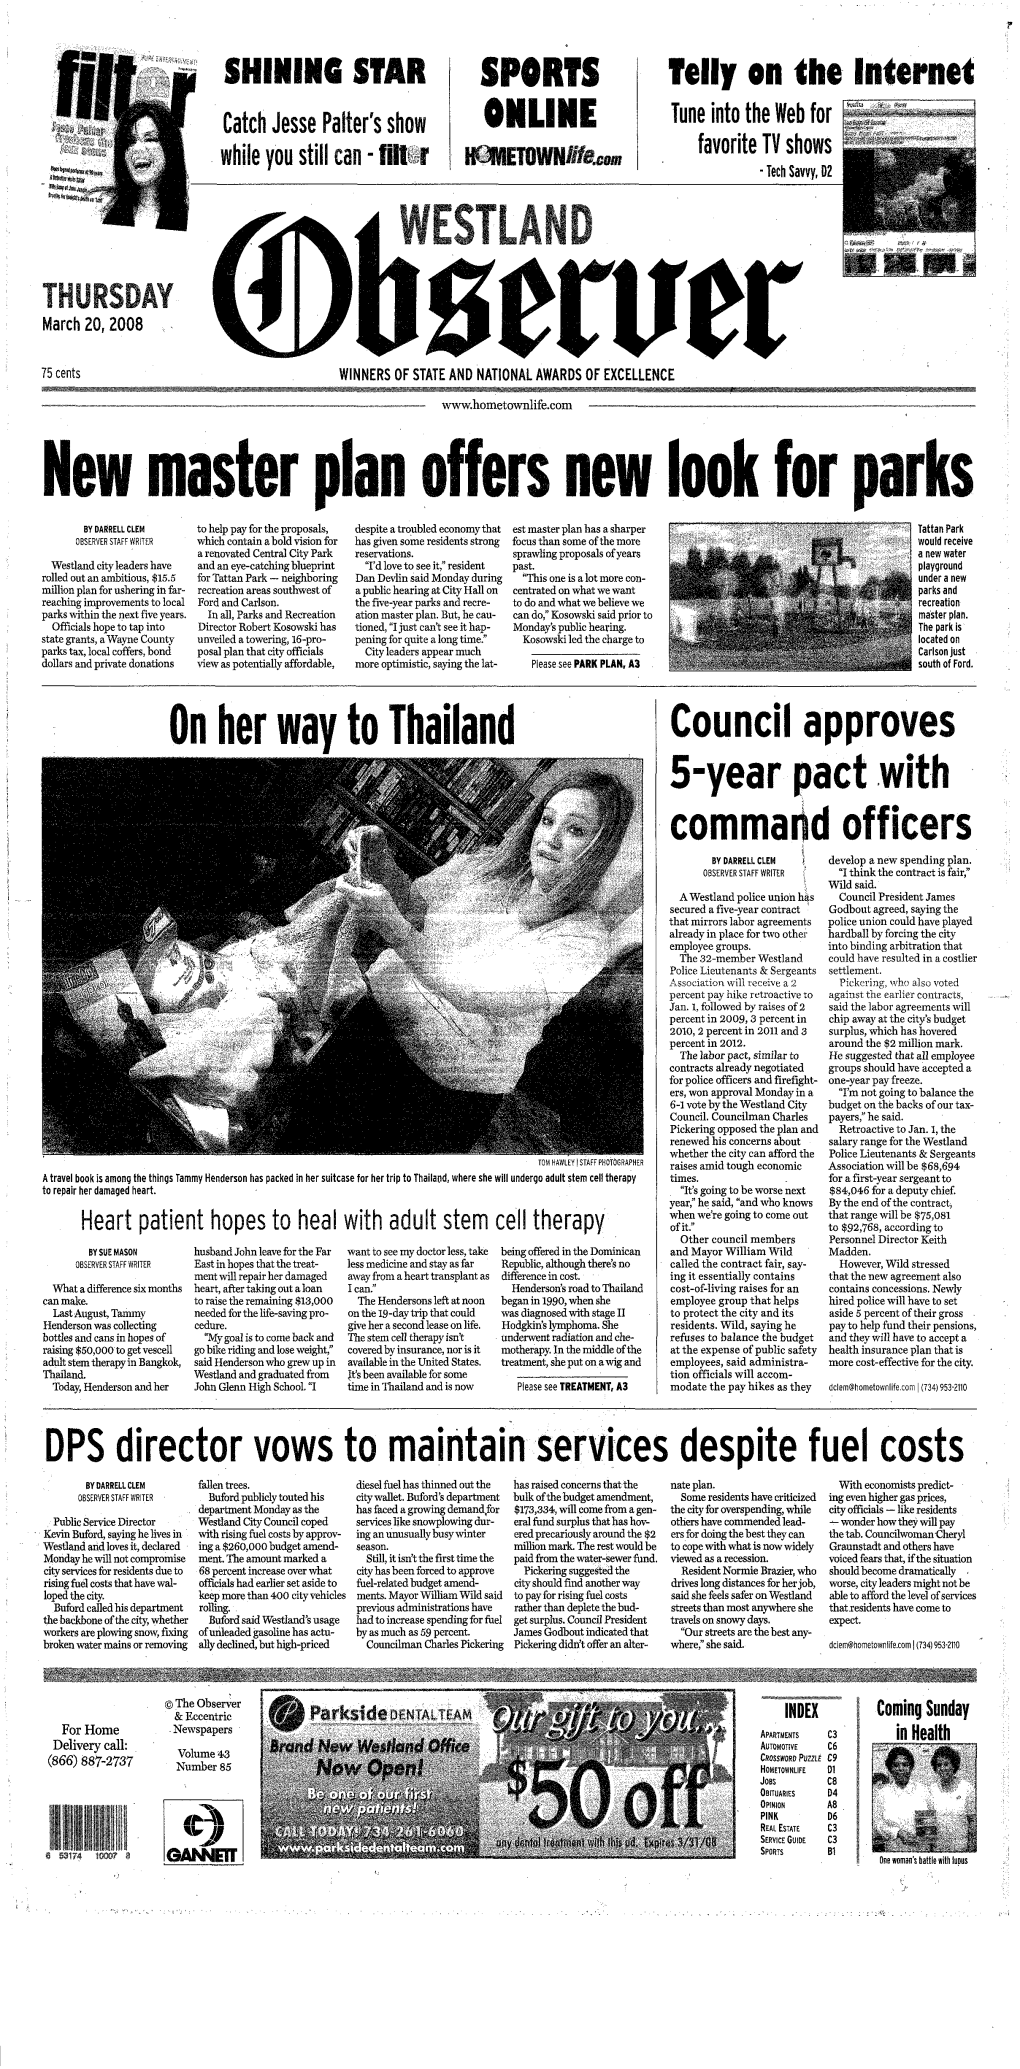 March 20,2008 A2 (W) LOCAL NEWS Firm's Software Lets Parents Secretly View Computer Use